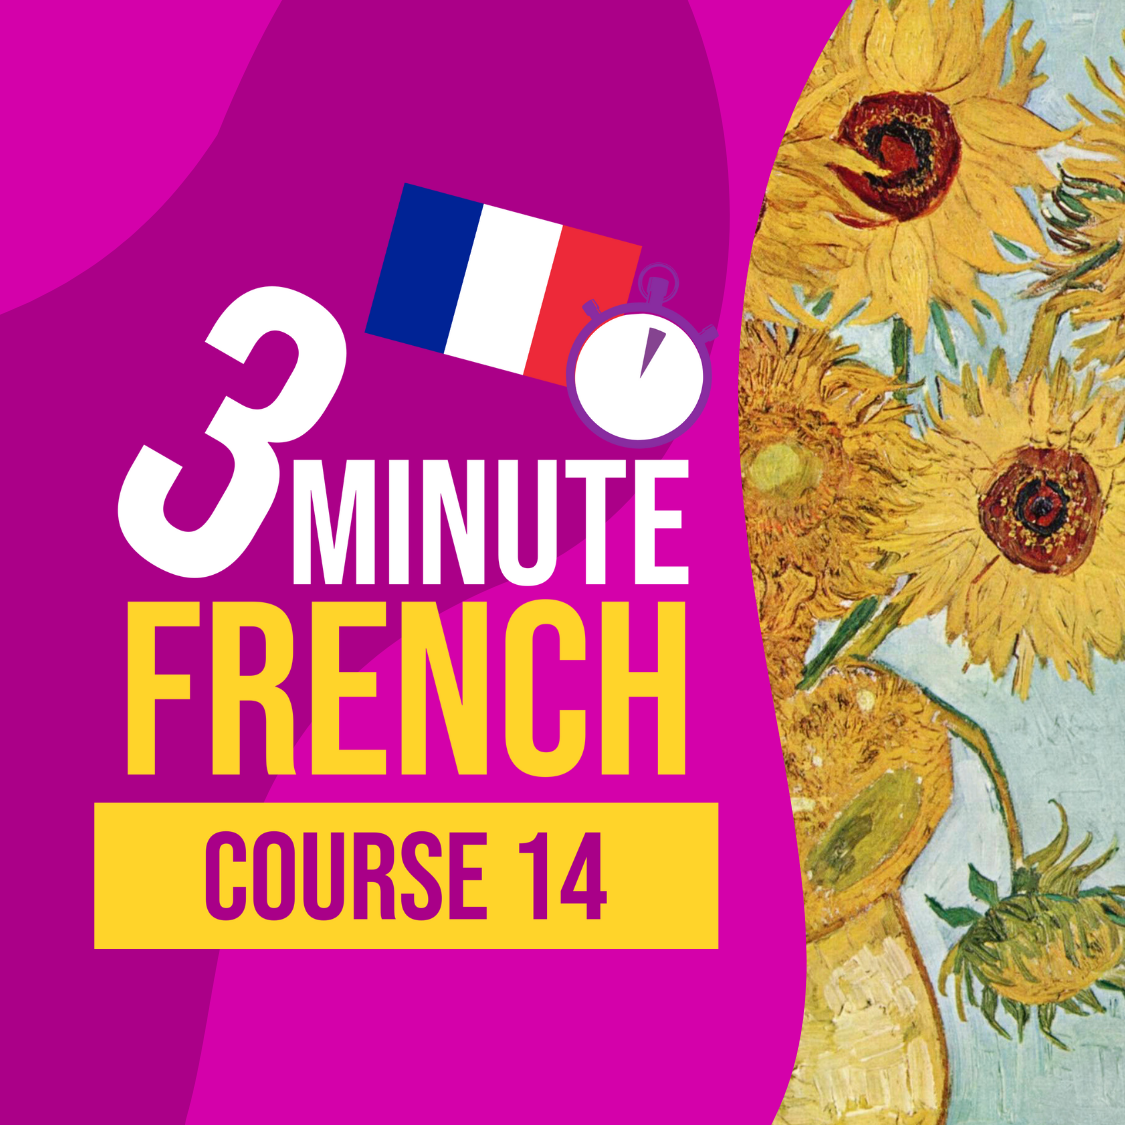 3 Minute French - Course 14